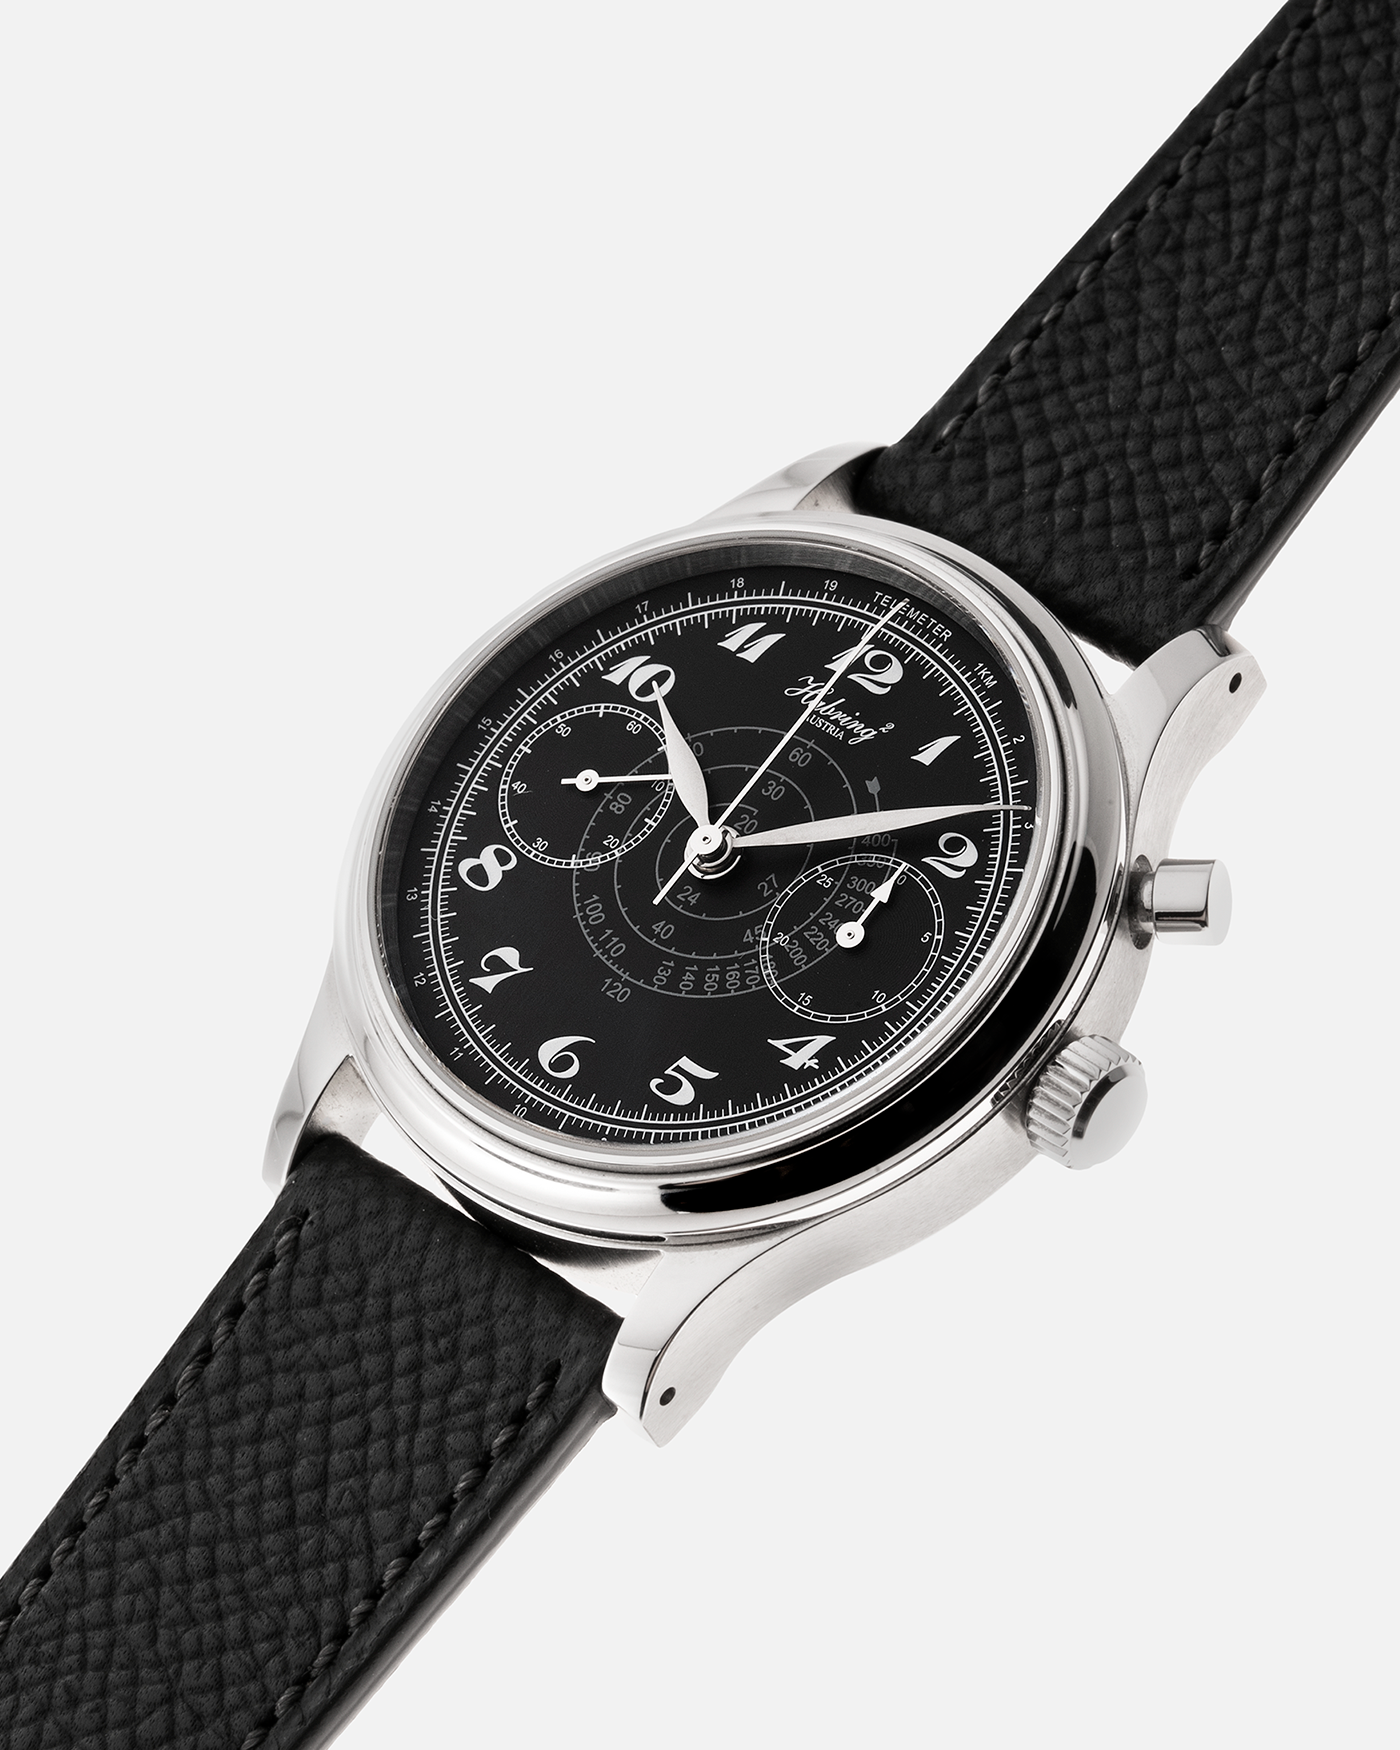 Brand: Habring  Model: Monopusher Shellman Japan Edition Year: 2021 Material: Stainless Steel  Movement: Cal. A11C-H1 Case Diameter: 38.5mm Lug Width: 20mm Bracelet/Strap: Molequin Anthracite Textured Calf Strap and Habring Monochrome Brown Nubuck Strap